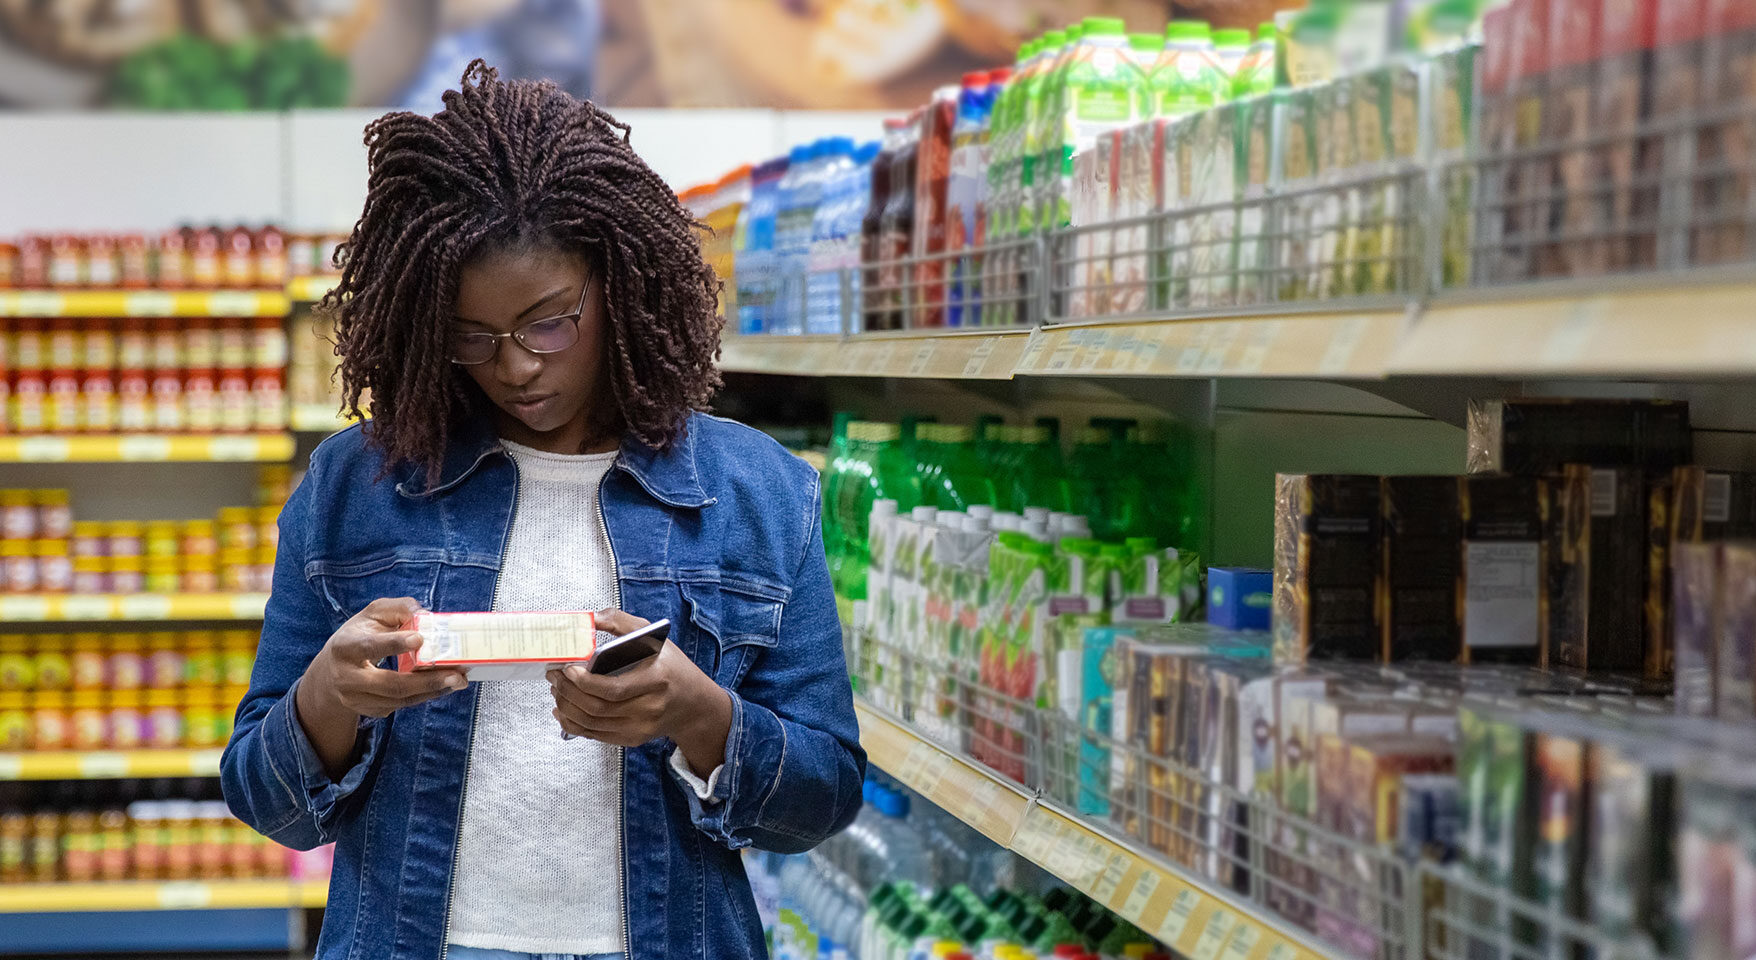 woman reading a label in the supermarket aisle